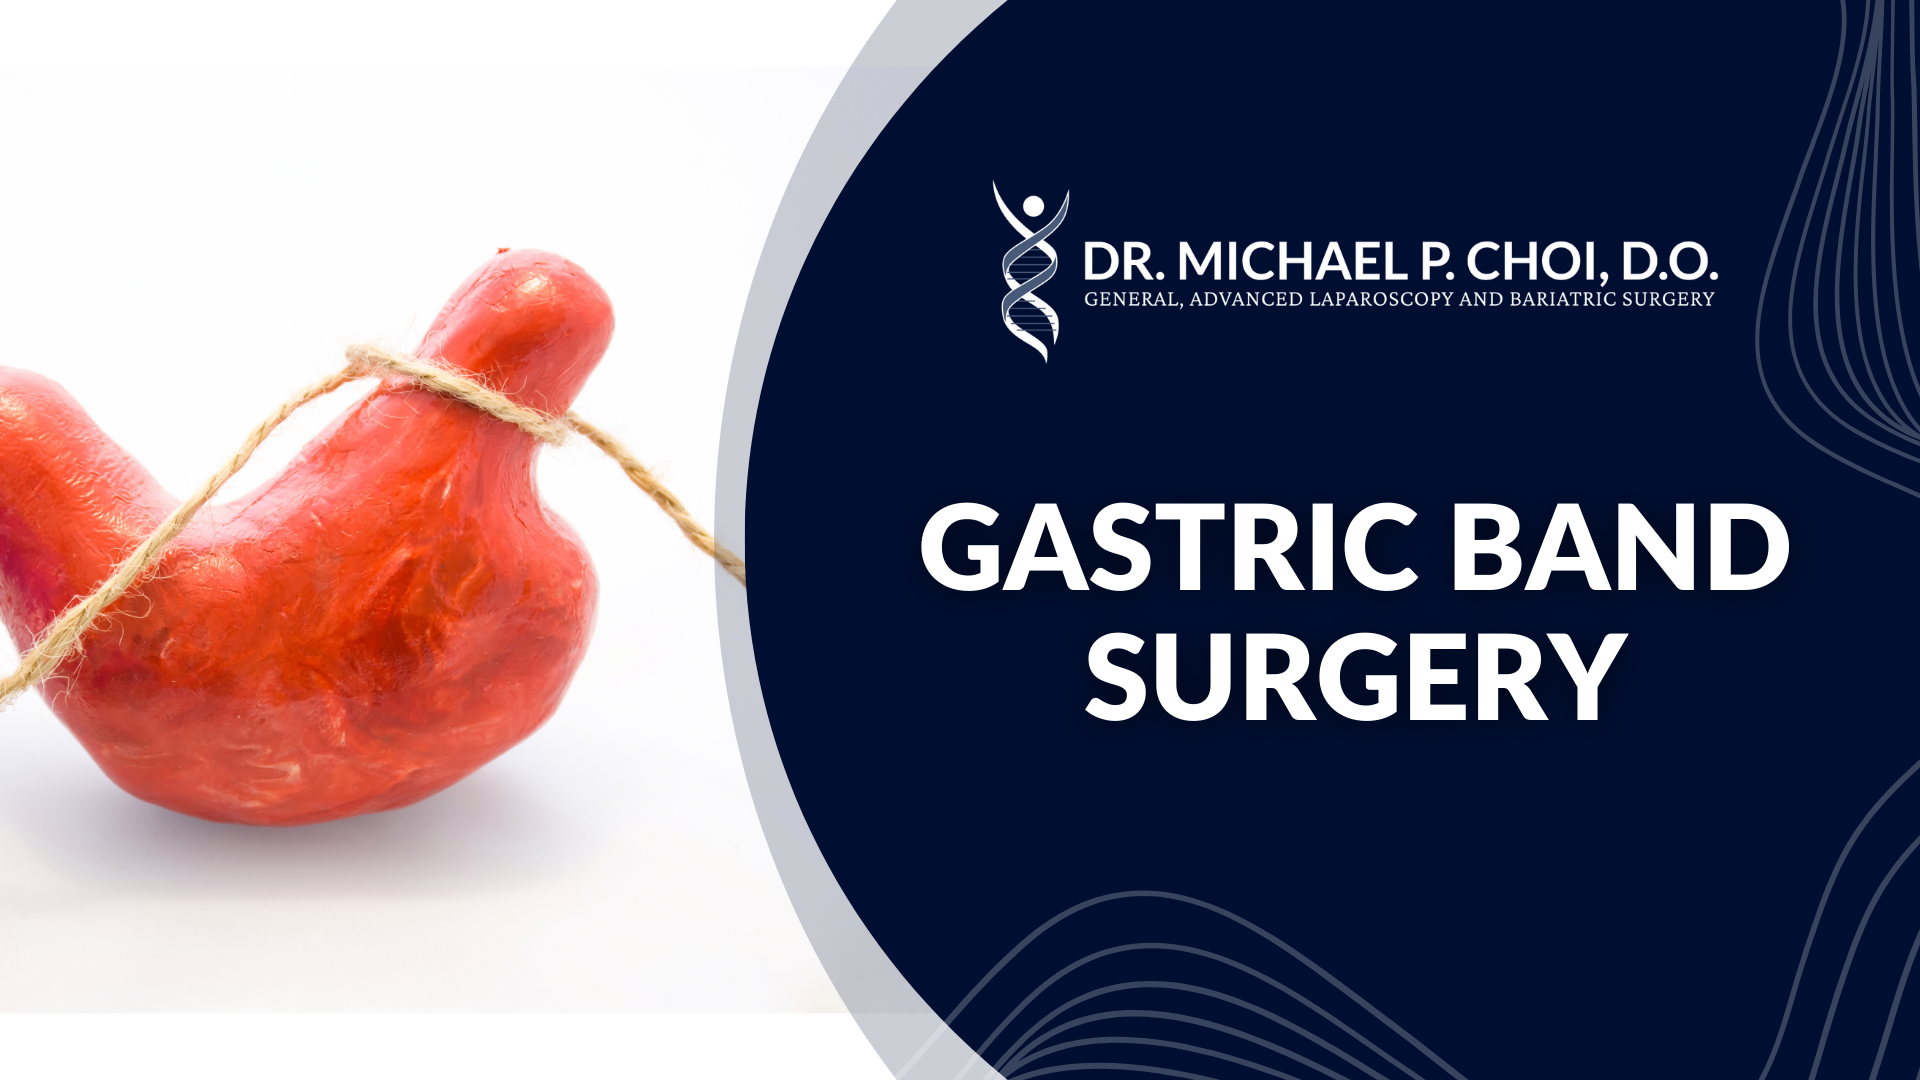 GASTRIC BAND SURGERY